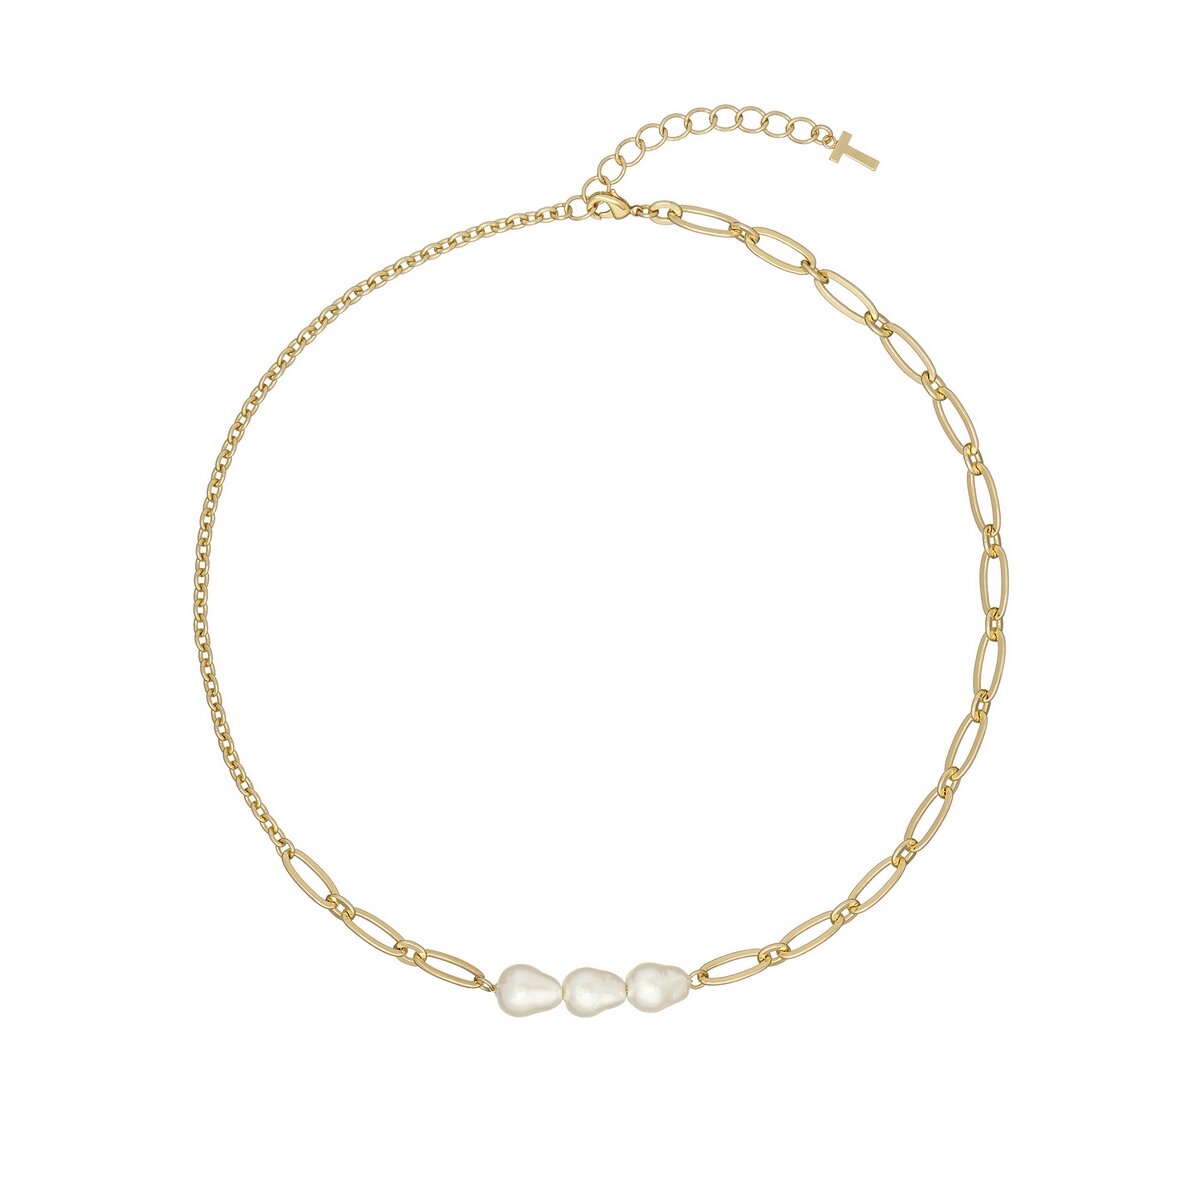 TED BAKER PERSA Pearly Chain Necklace Gold Tone, Pearl